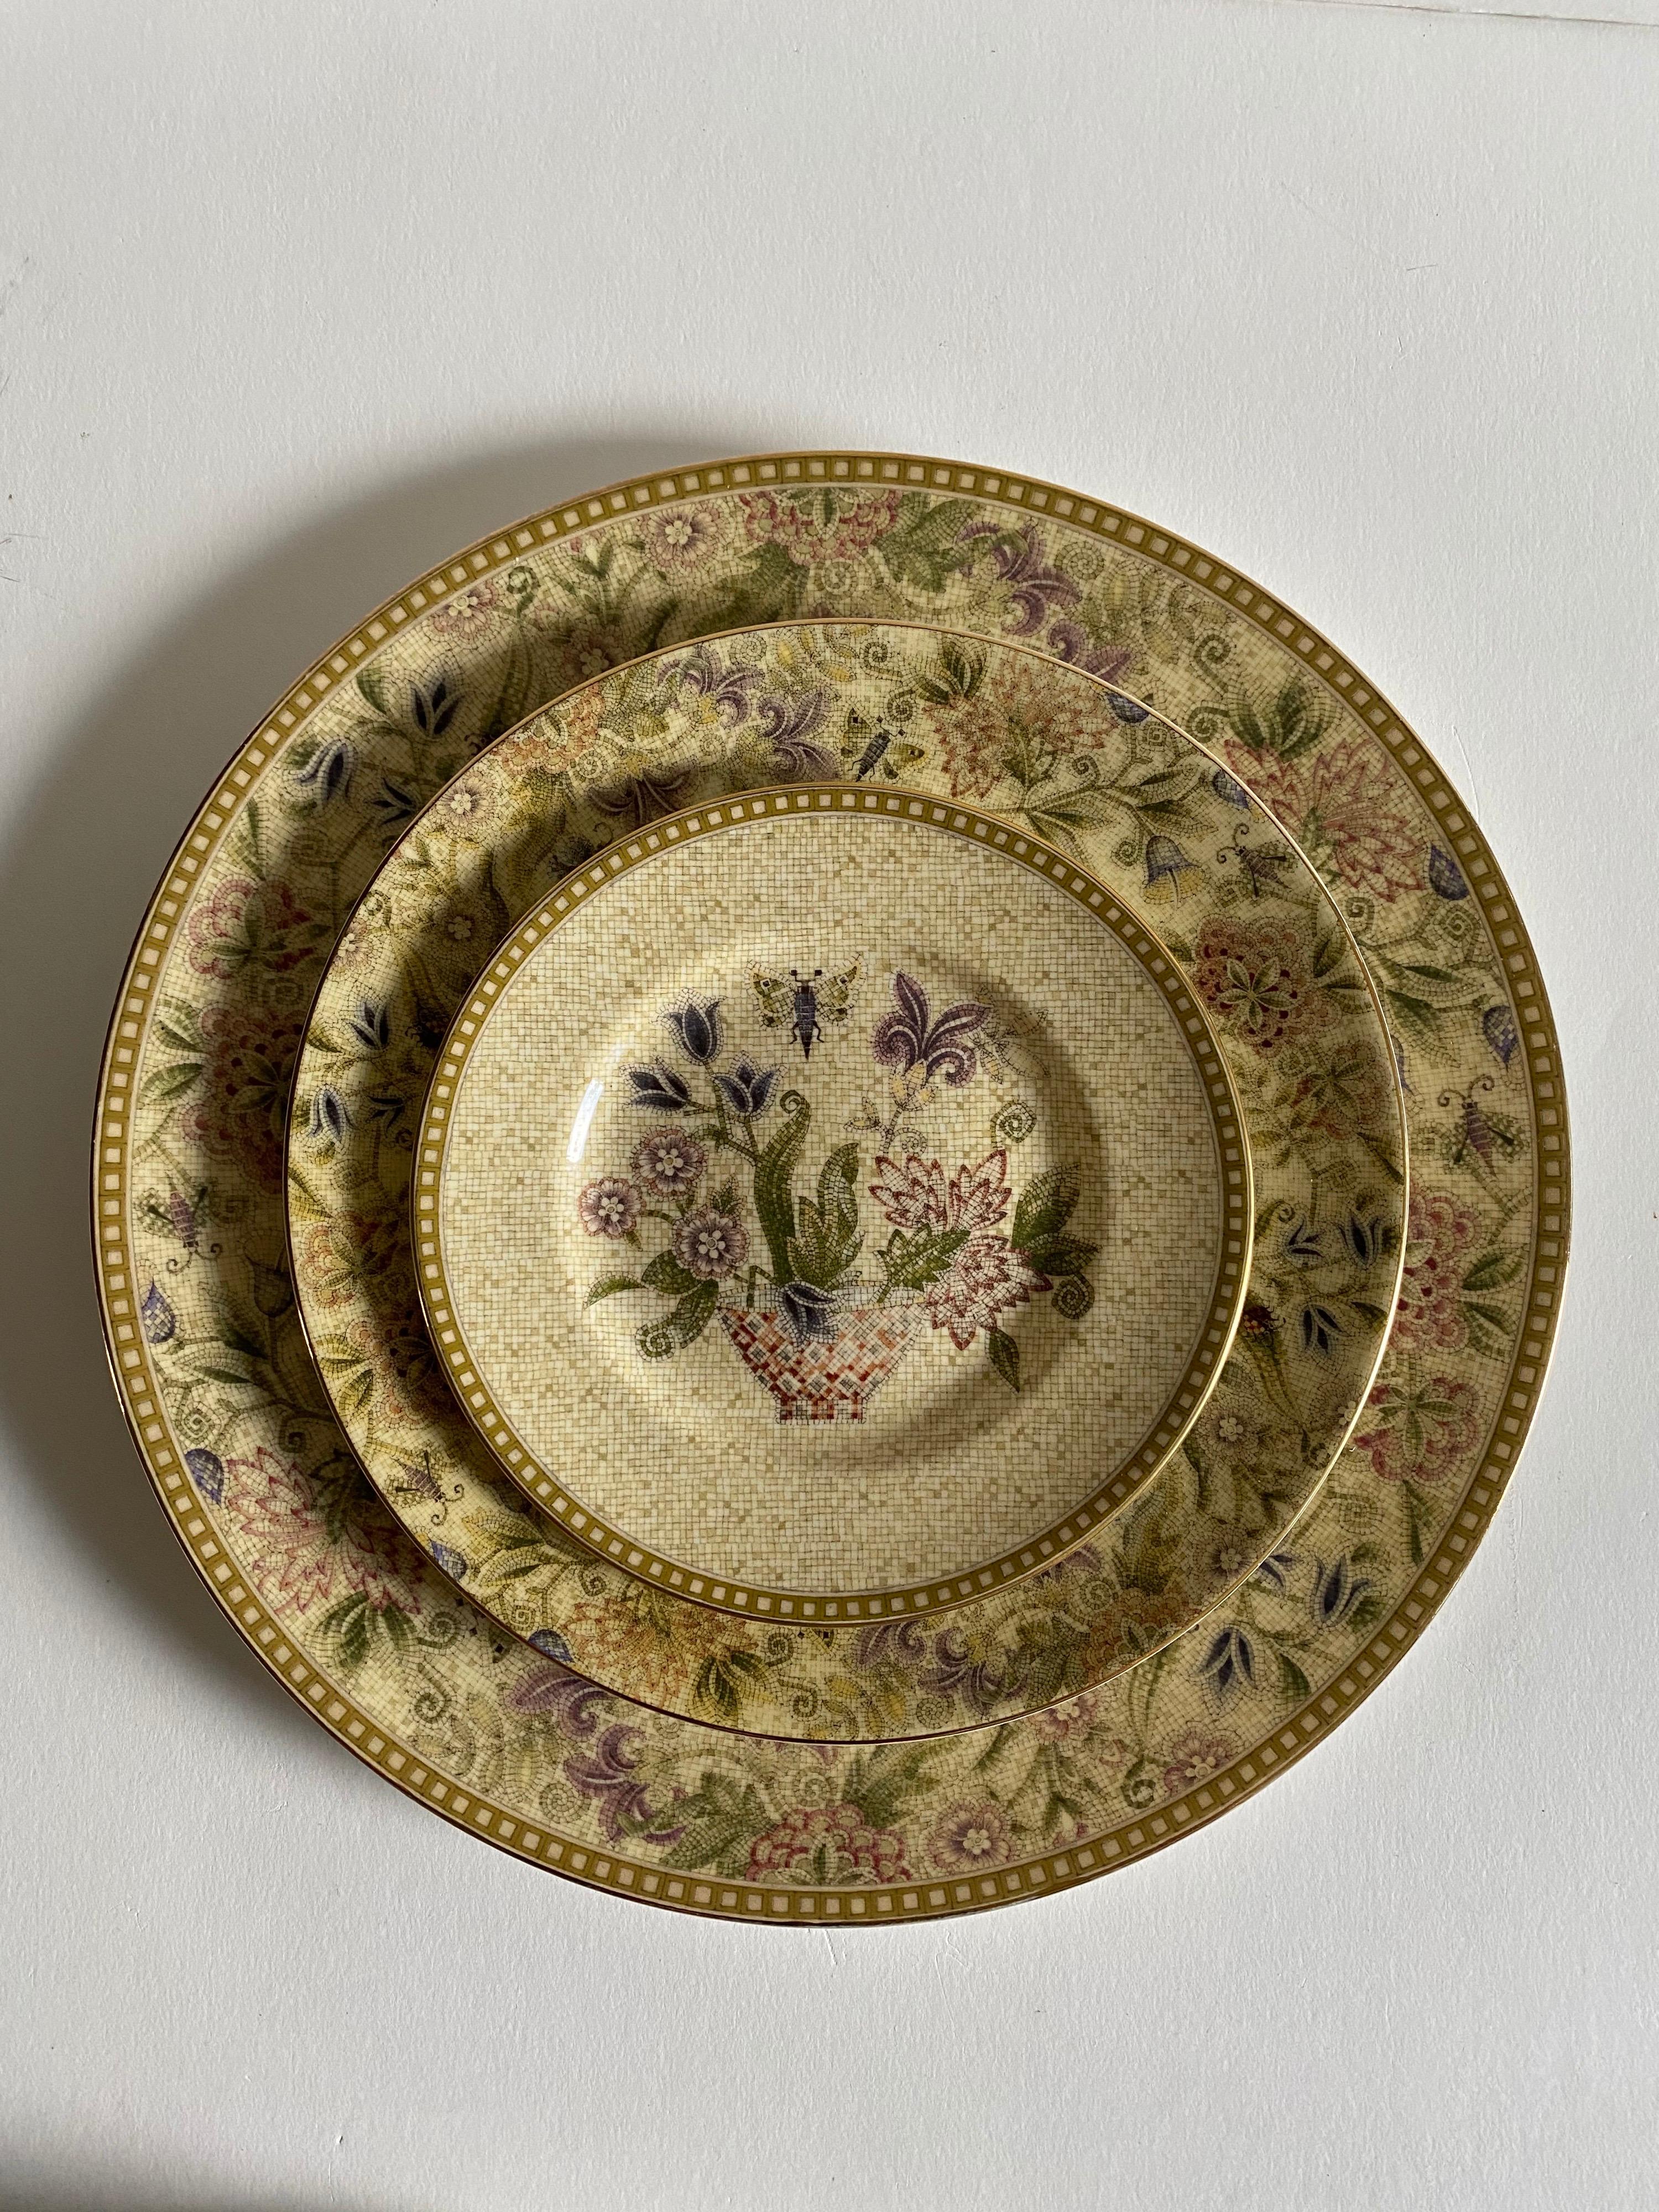 An 25 piece lot of dinnerware in the Floral Tapestry pattern by Wedgwood. 

Signed. Made in England. Produced from 1997 to 2005.

Bone china.

Includes the following 25 pieces:
10 pcs- Dinner plates, width: 10-3/4 inches.
10 pcs- Bread plates,